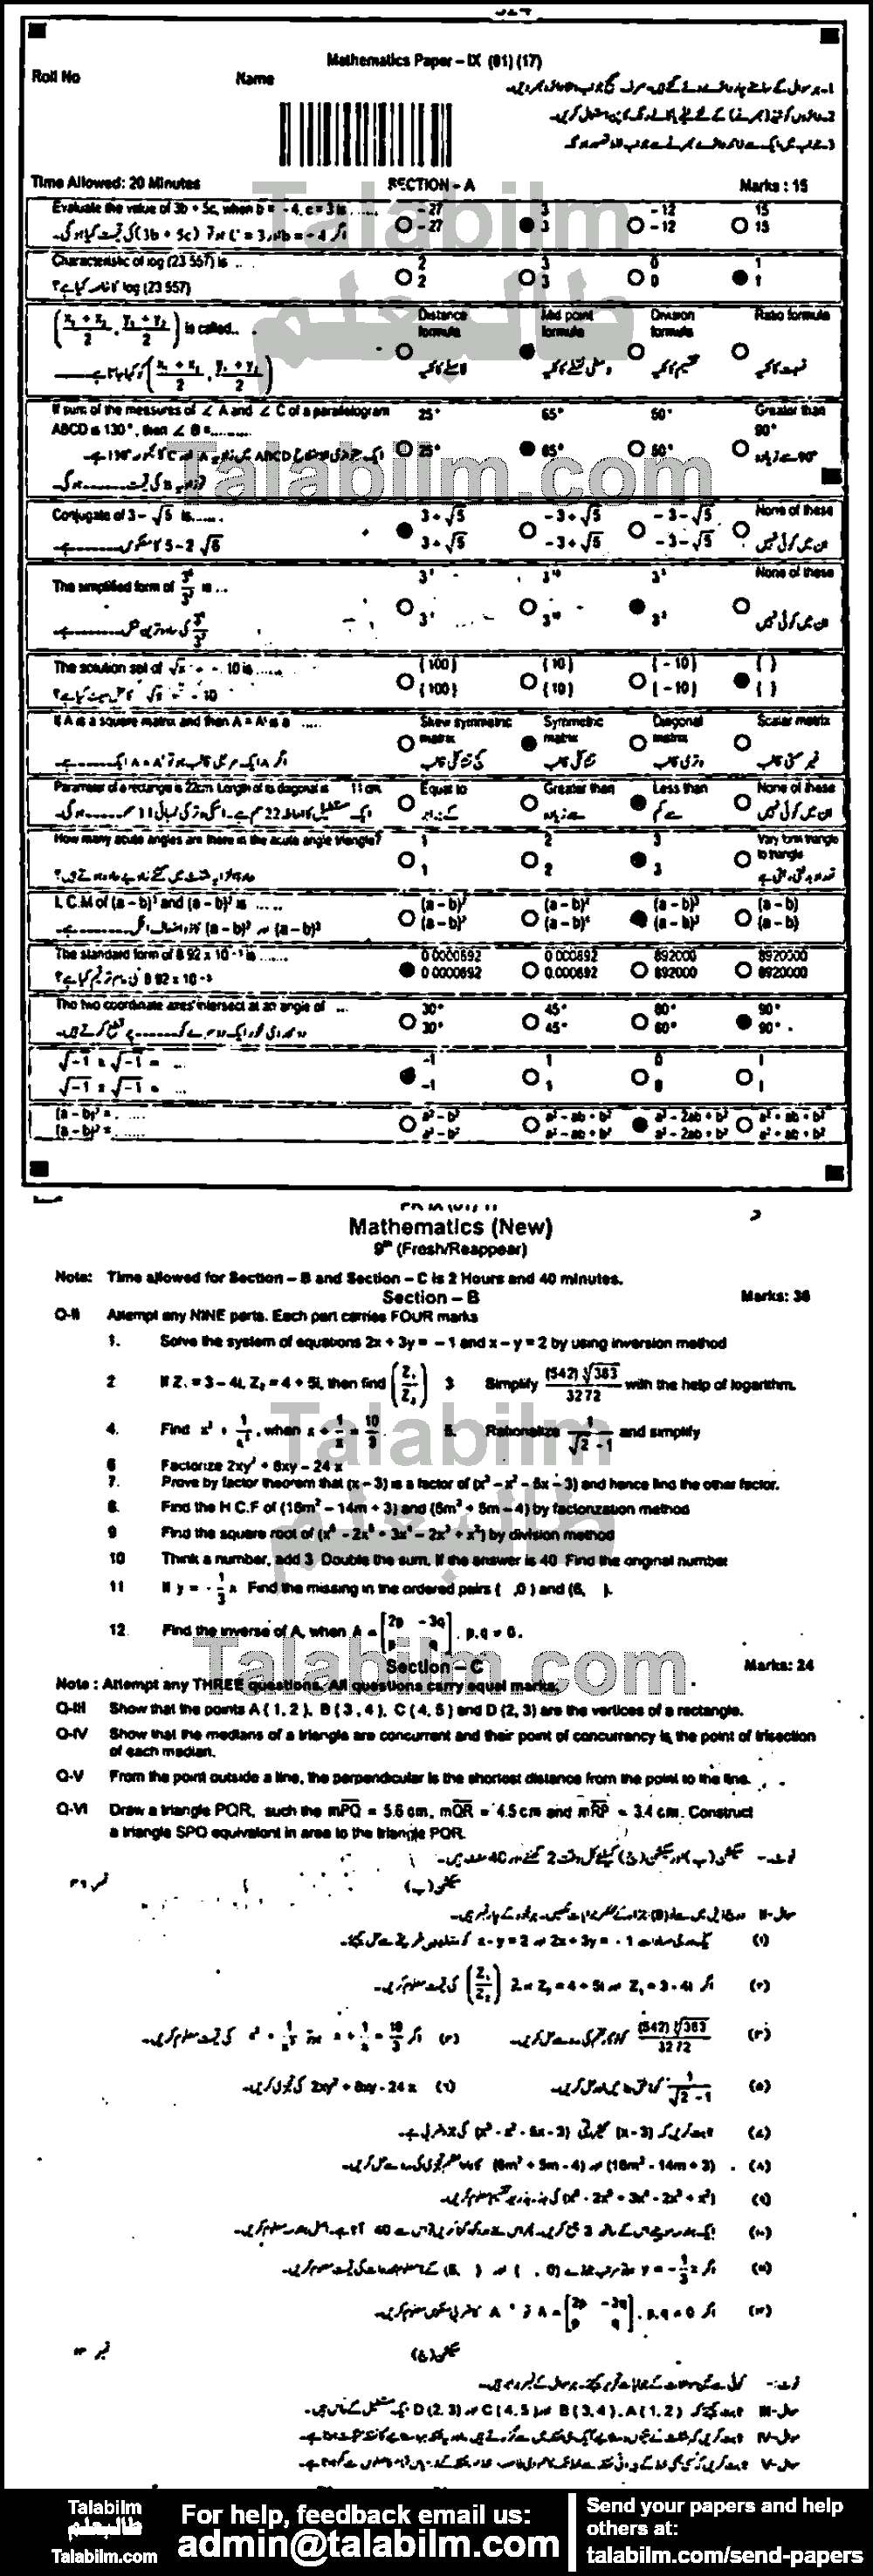 Math 0 past paper for 2017 Group-I